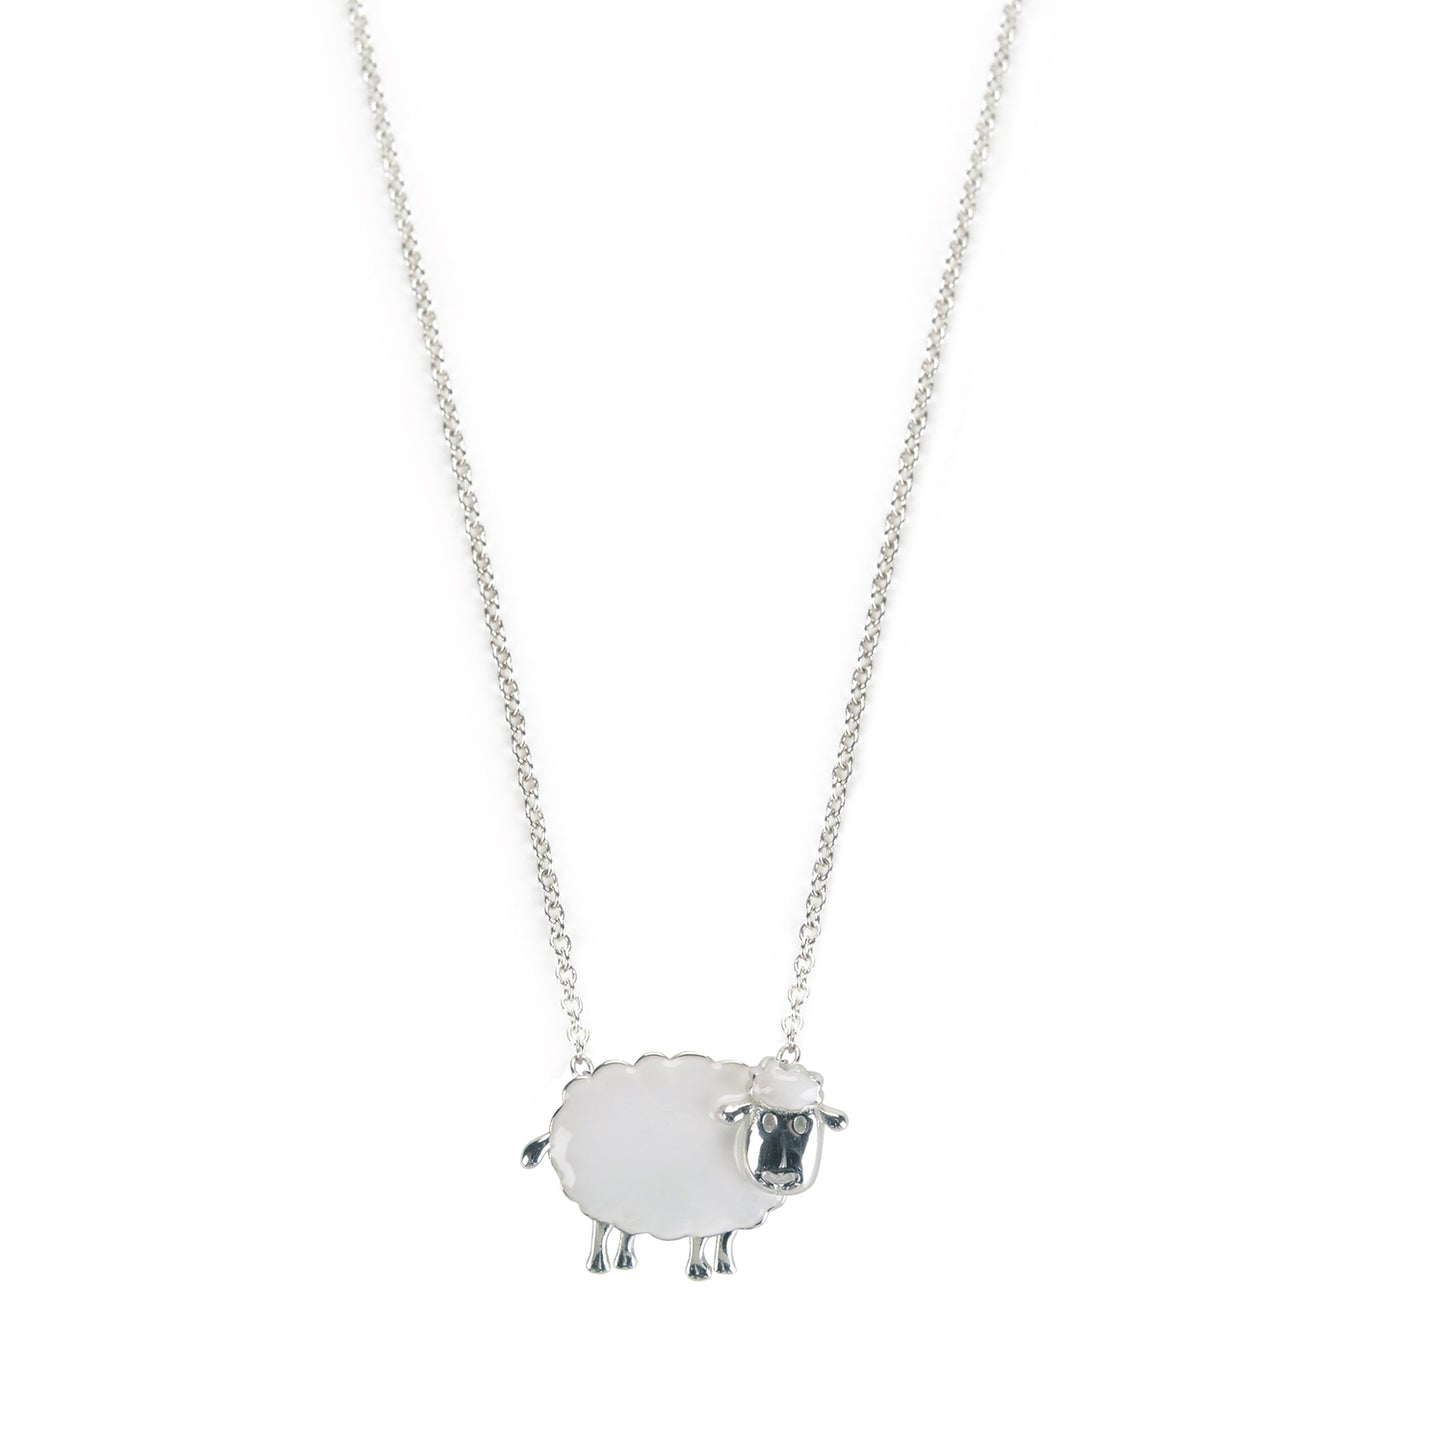 White sheep necklace in silver and enamel